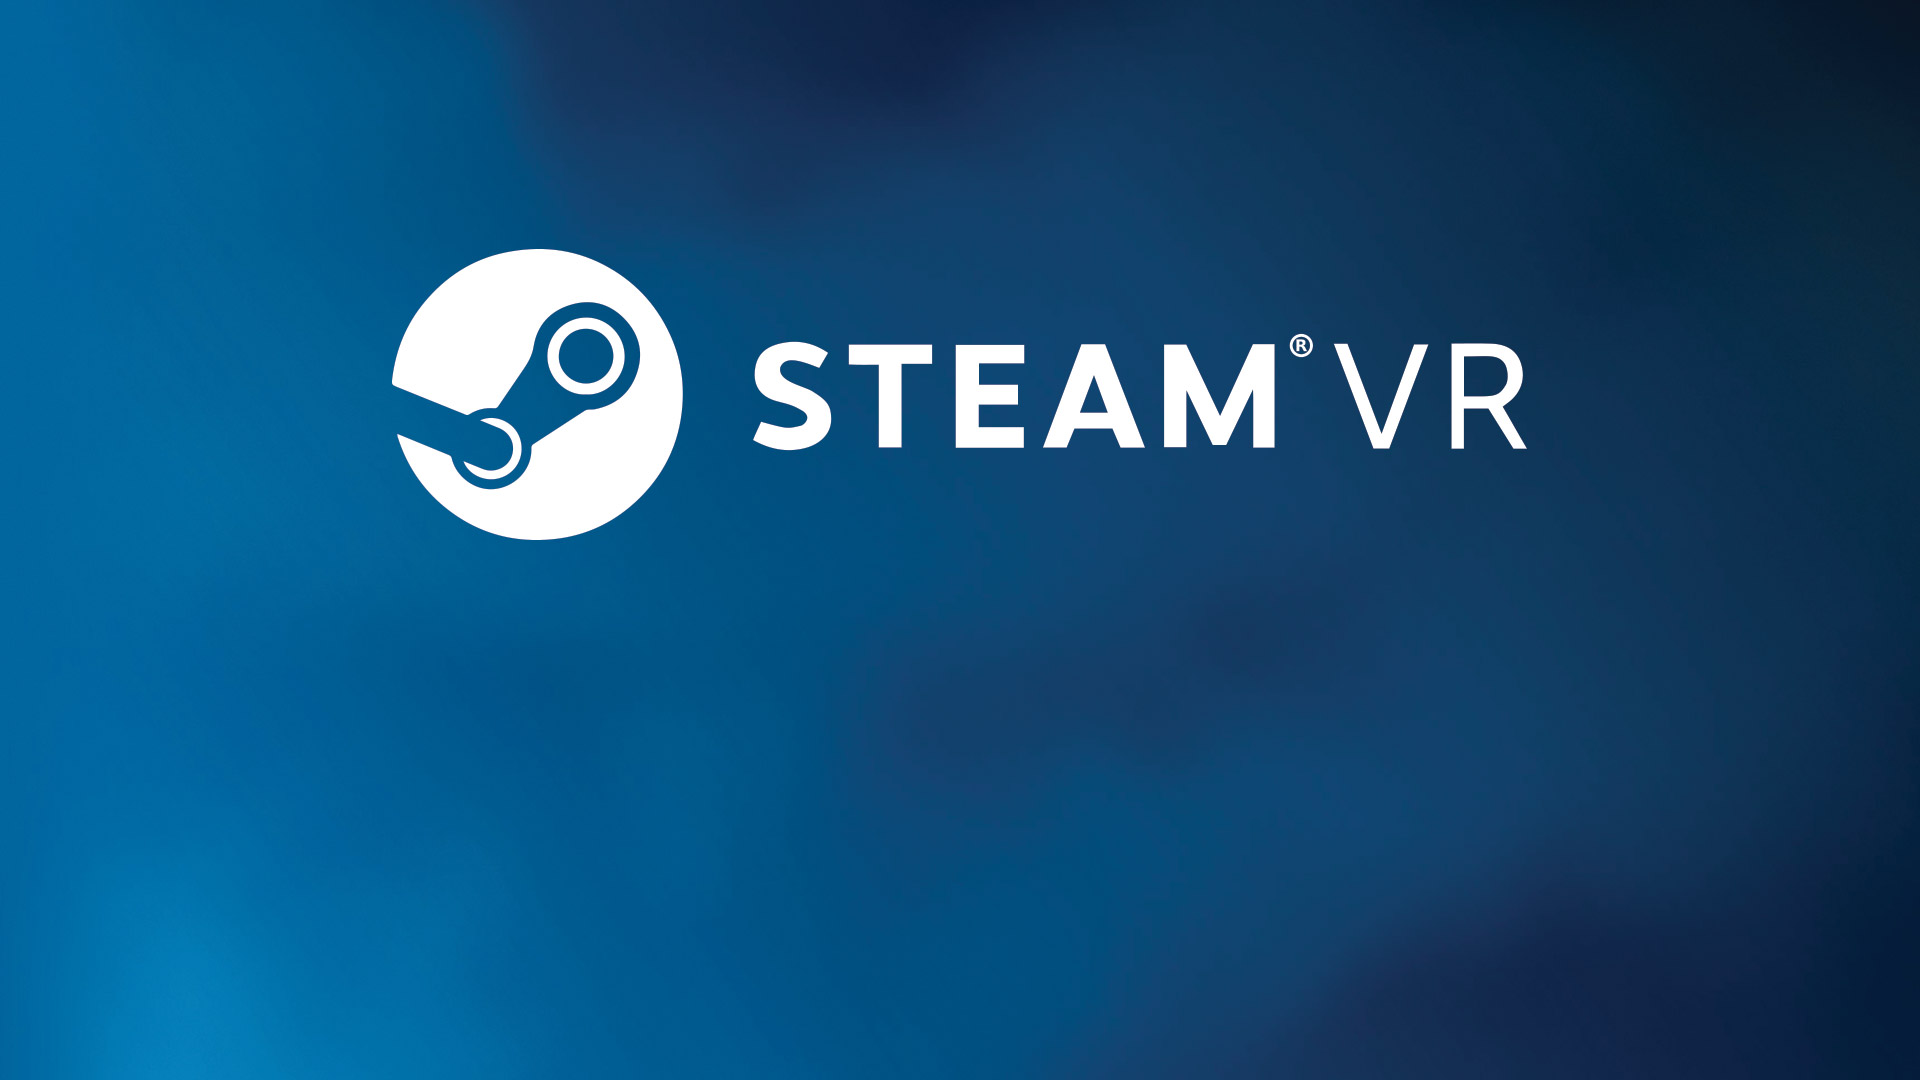 SteamVR Will Support Windows VR Headsets – Road to VR